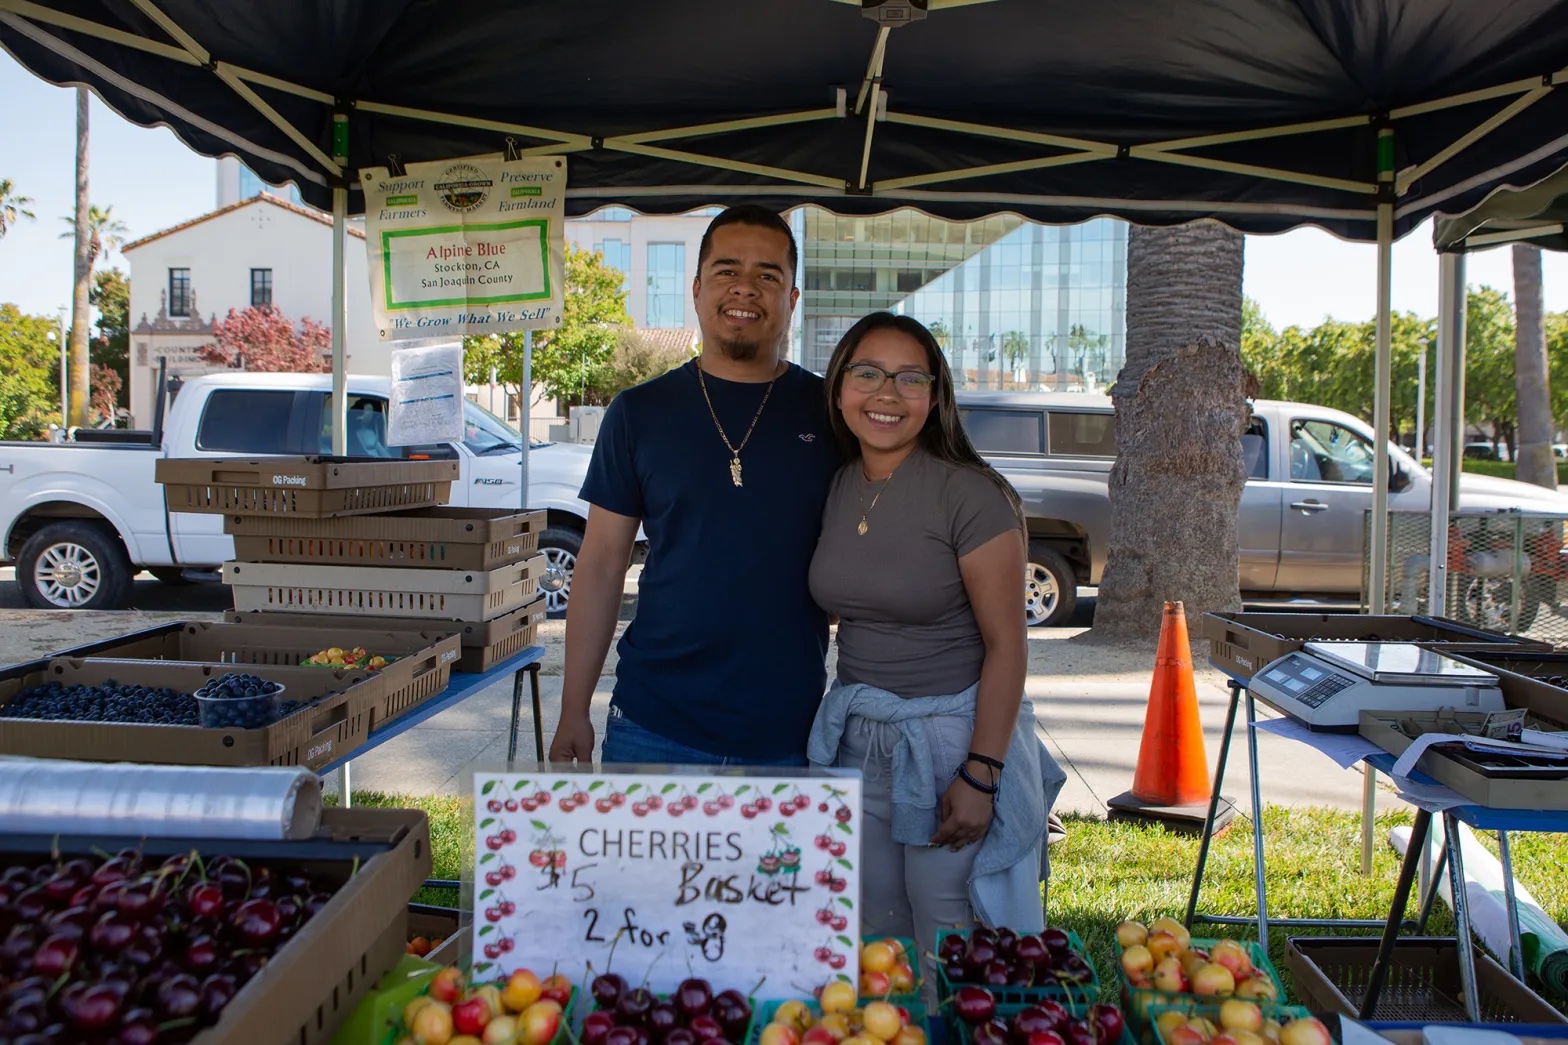 A Latino man and a Latino girl, both smiling and with arms around each other, stand under a tent and behind a table of fruit, with a sign advertising cherries